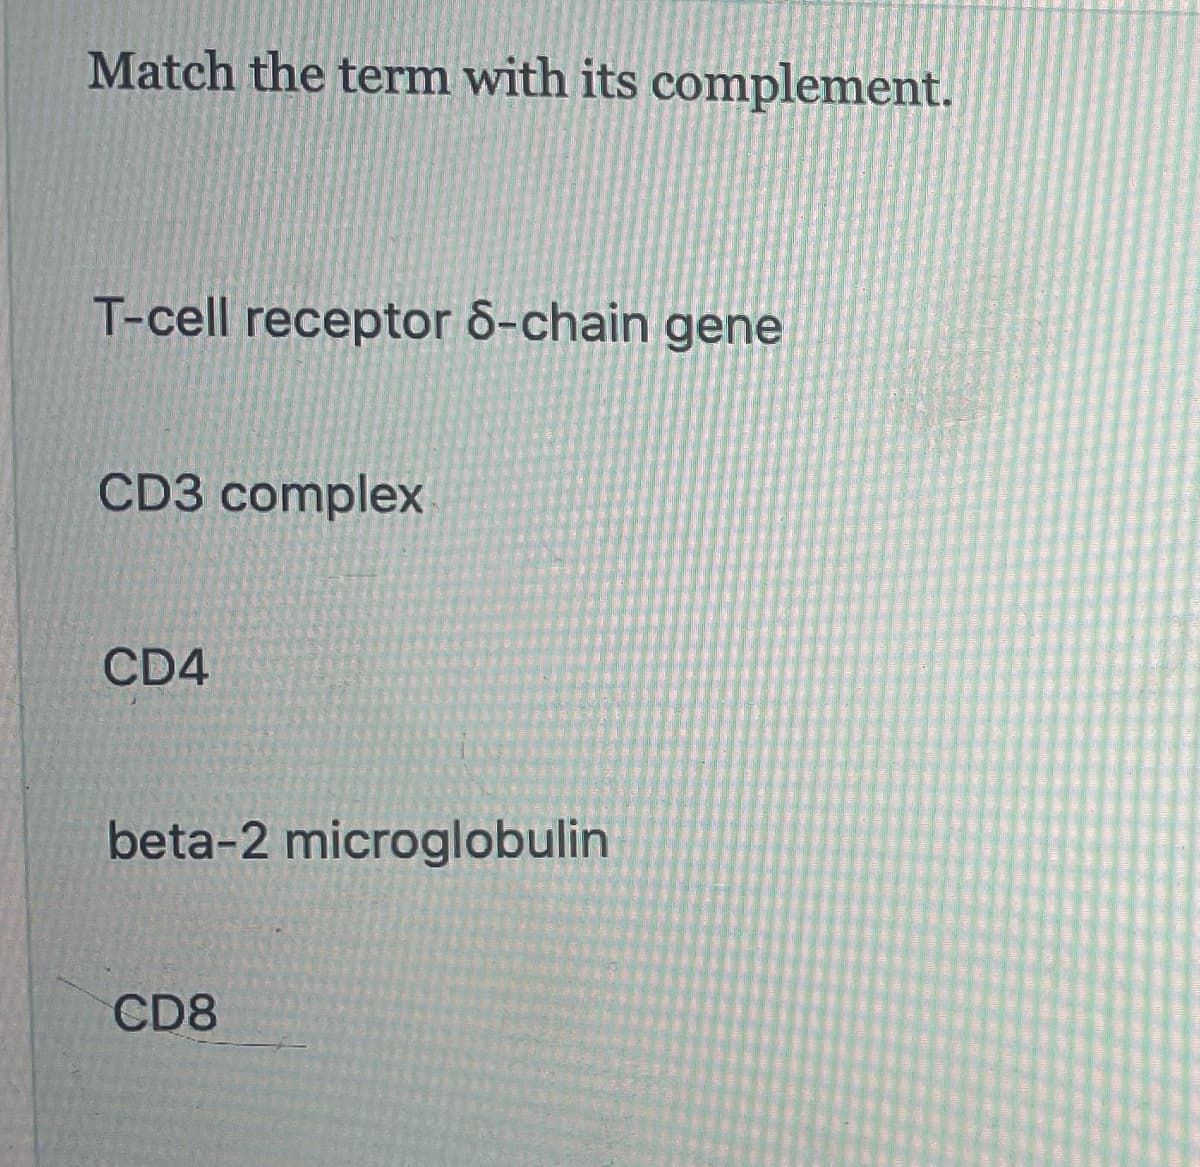 Match the term with its complement.
T-cell receptor 8-chain gene
CD3 complex
CD4
beta-2 microglobulin
CD8